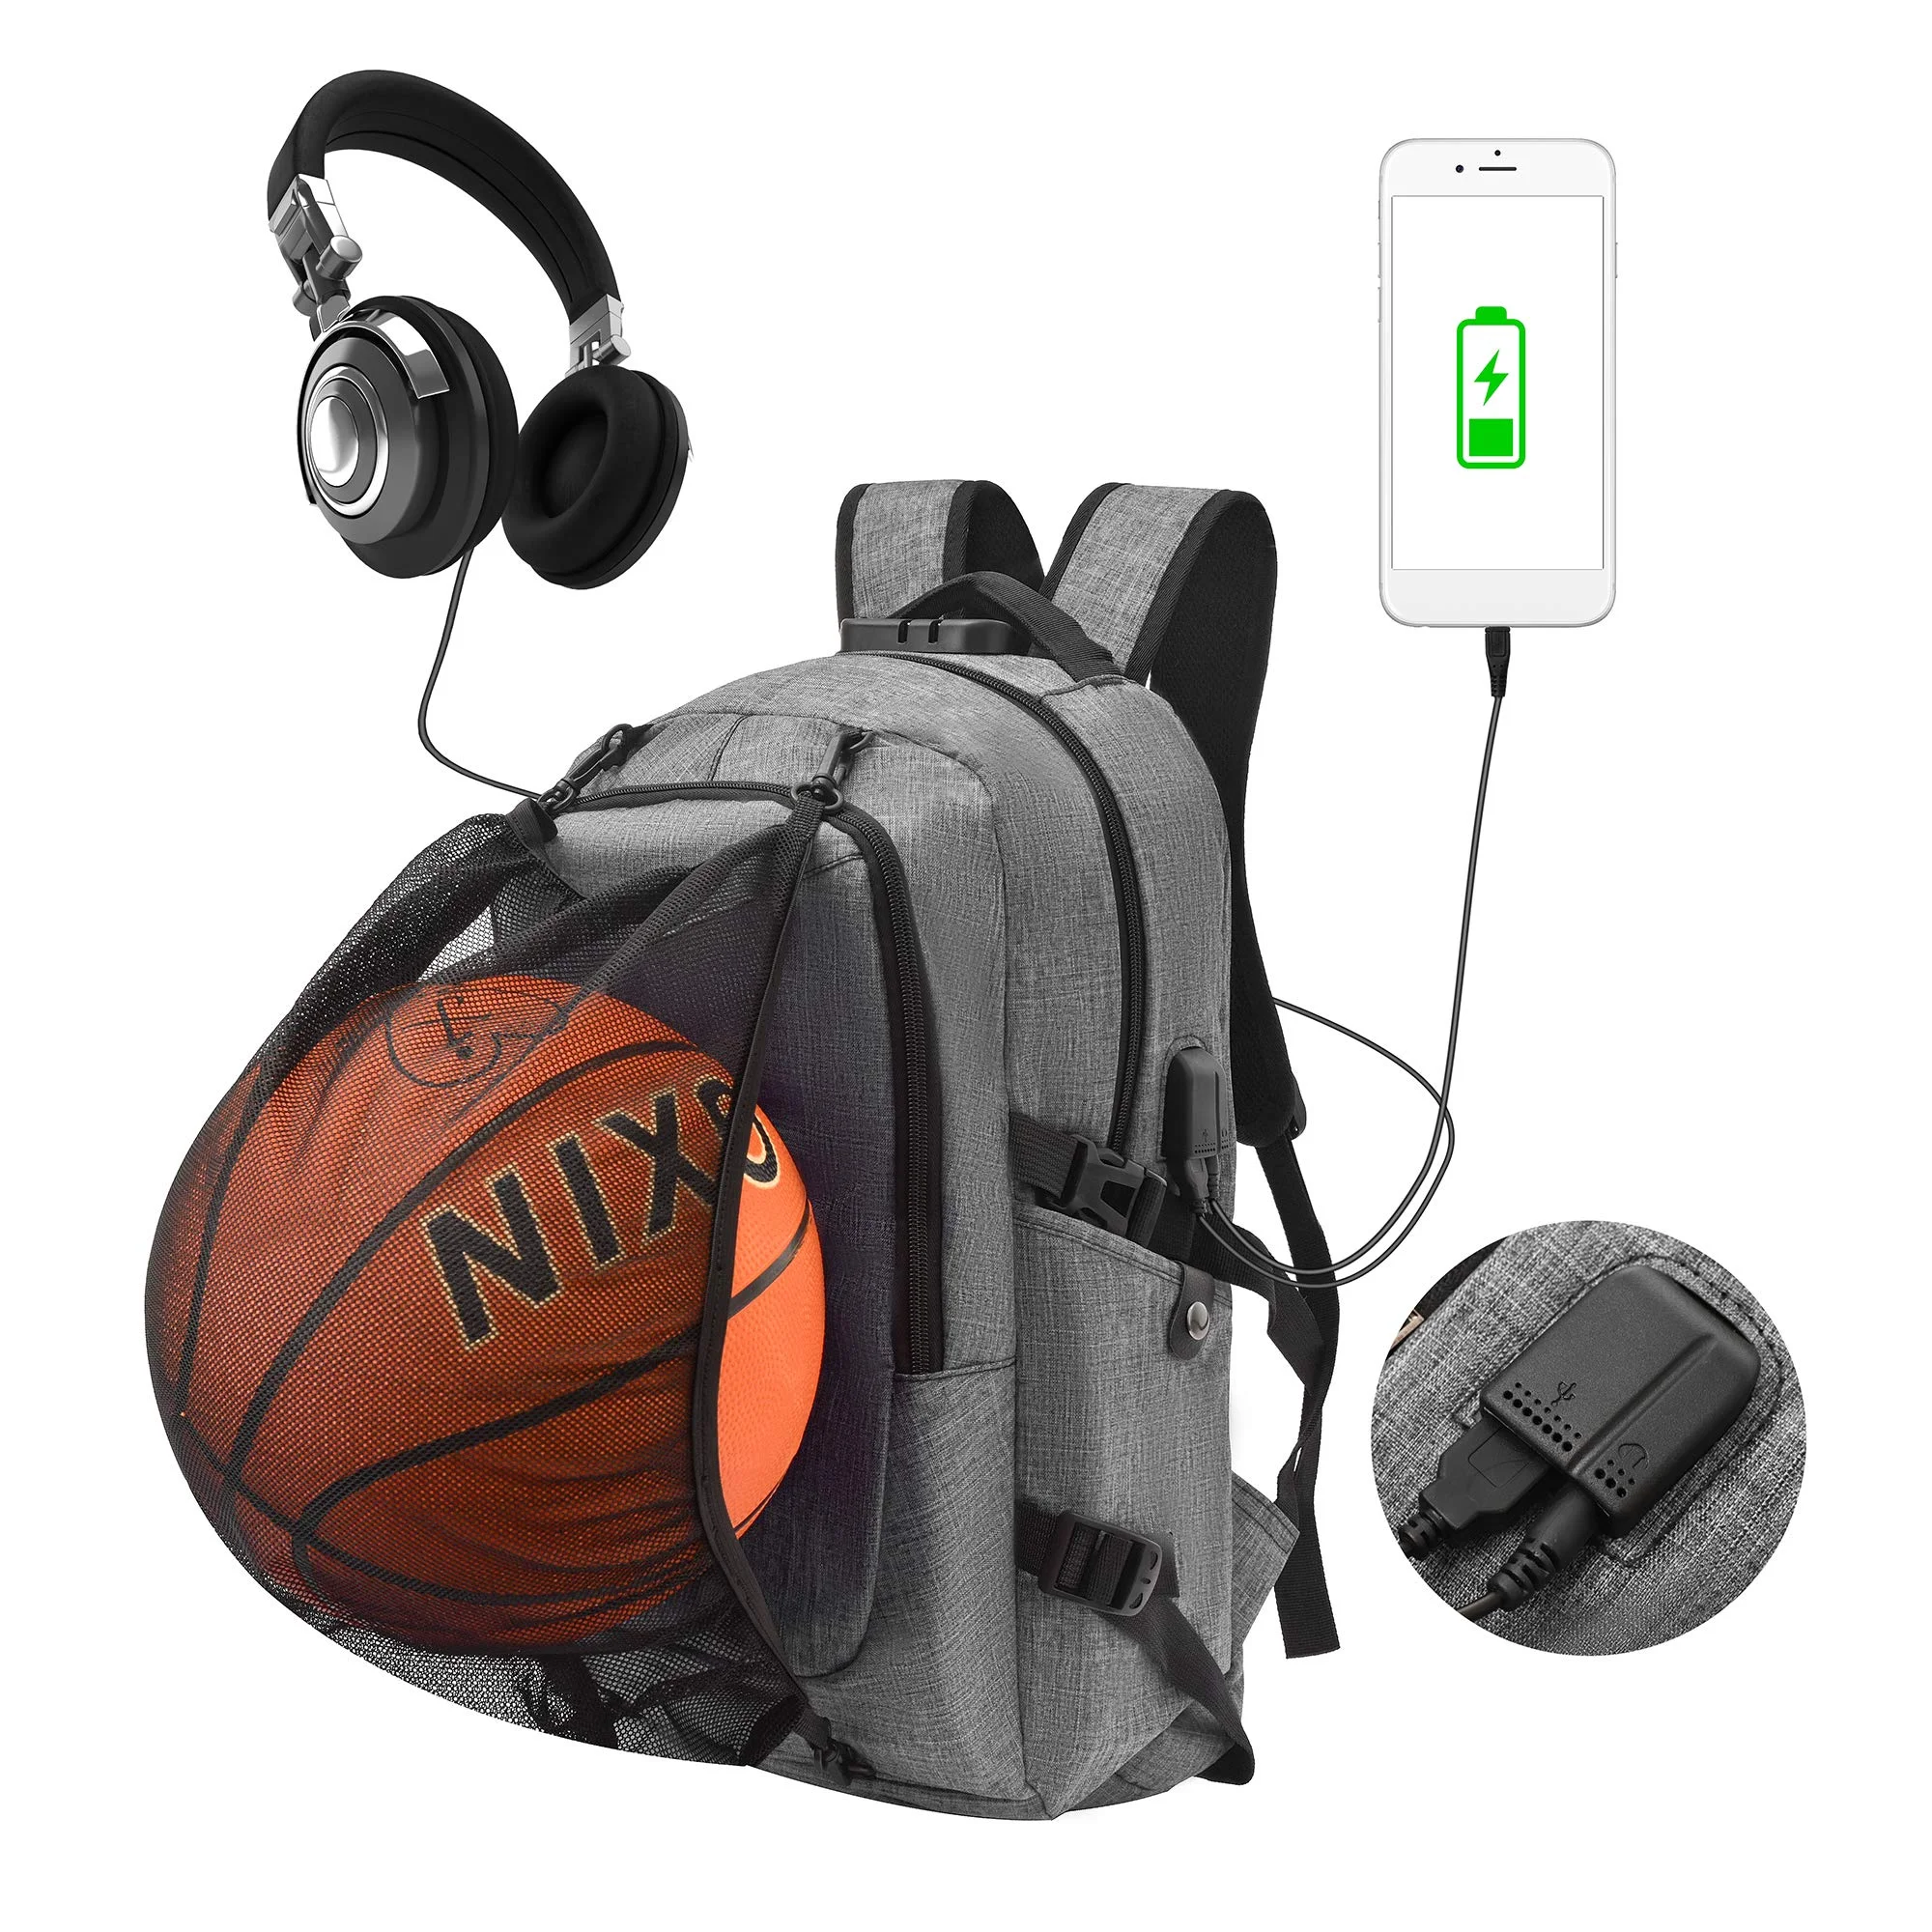 

Large Durable Anti-Theft Laptop Backpack College School Bag with Basketball Net & USB Charging Port for Boys Girls, As picture shown, or custom